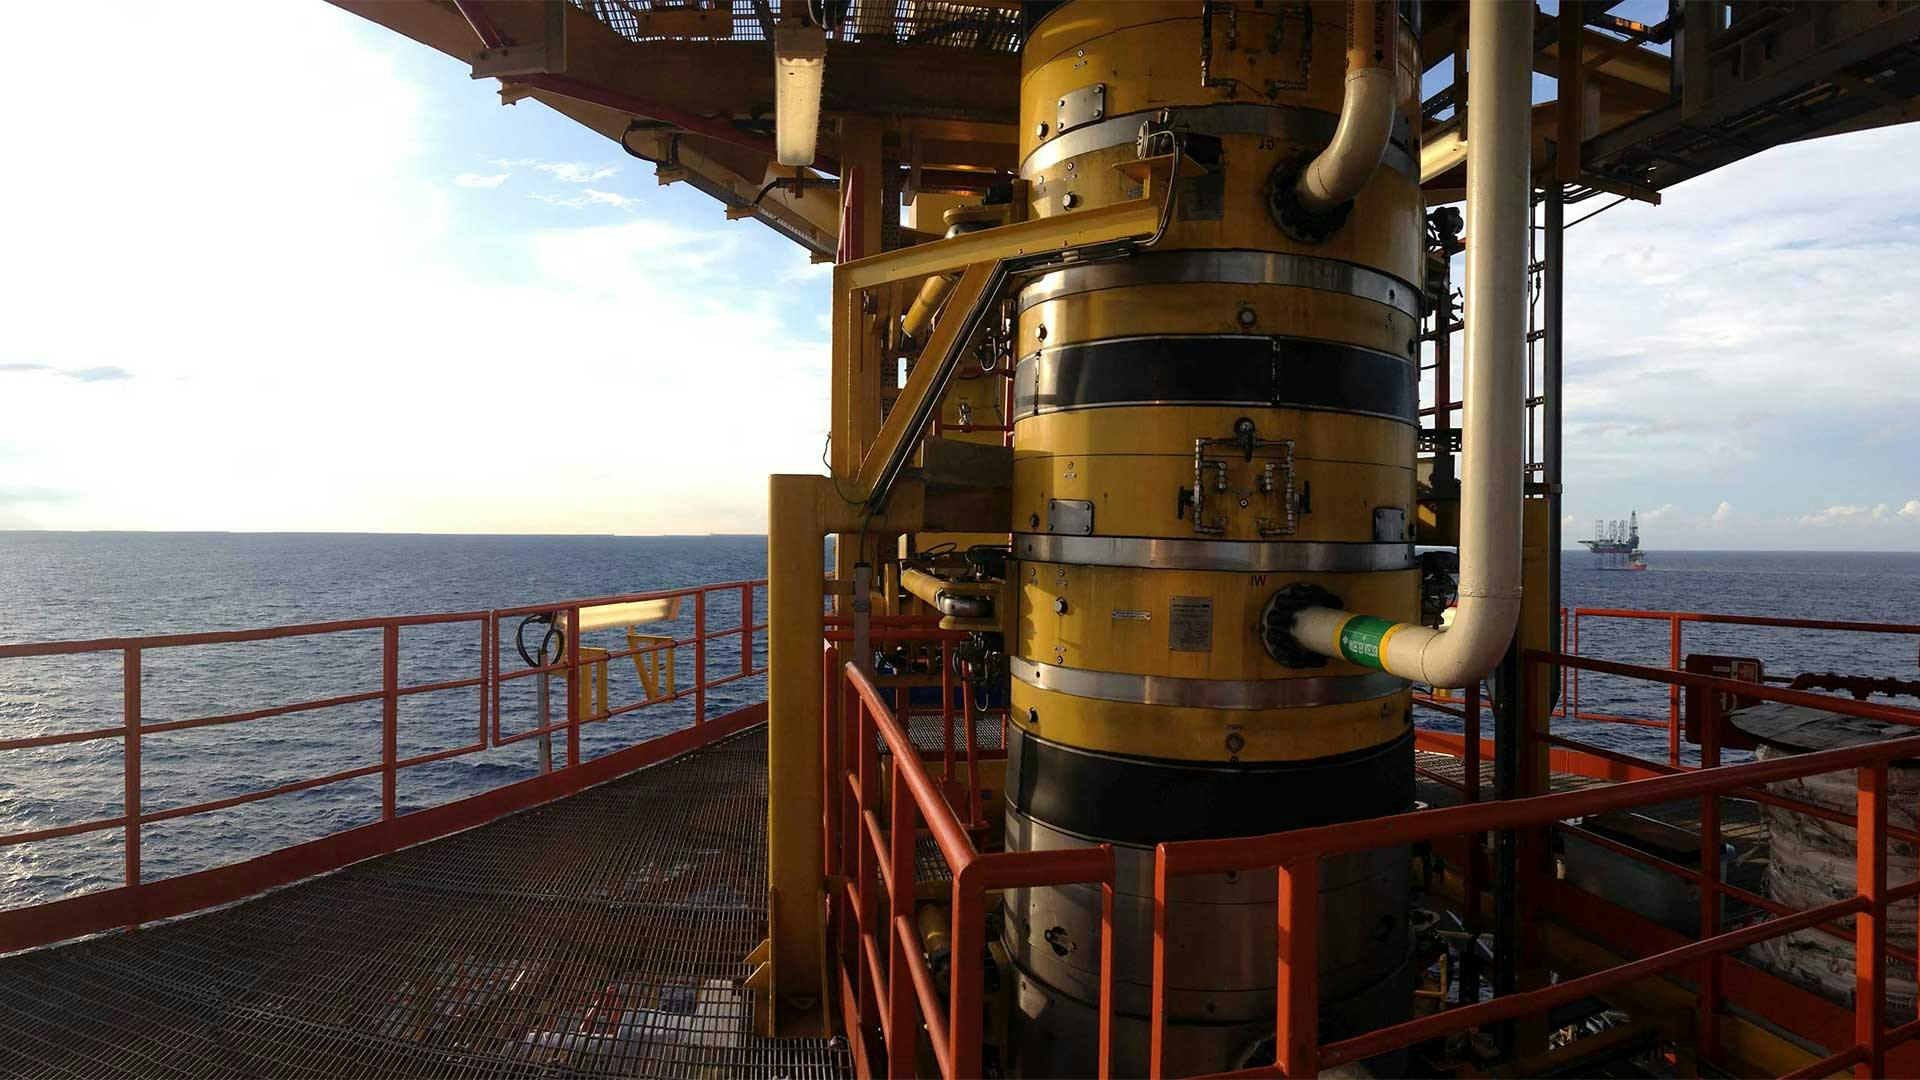 An APL tool on a rig ship at sea